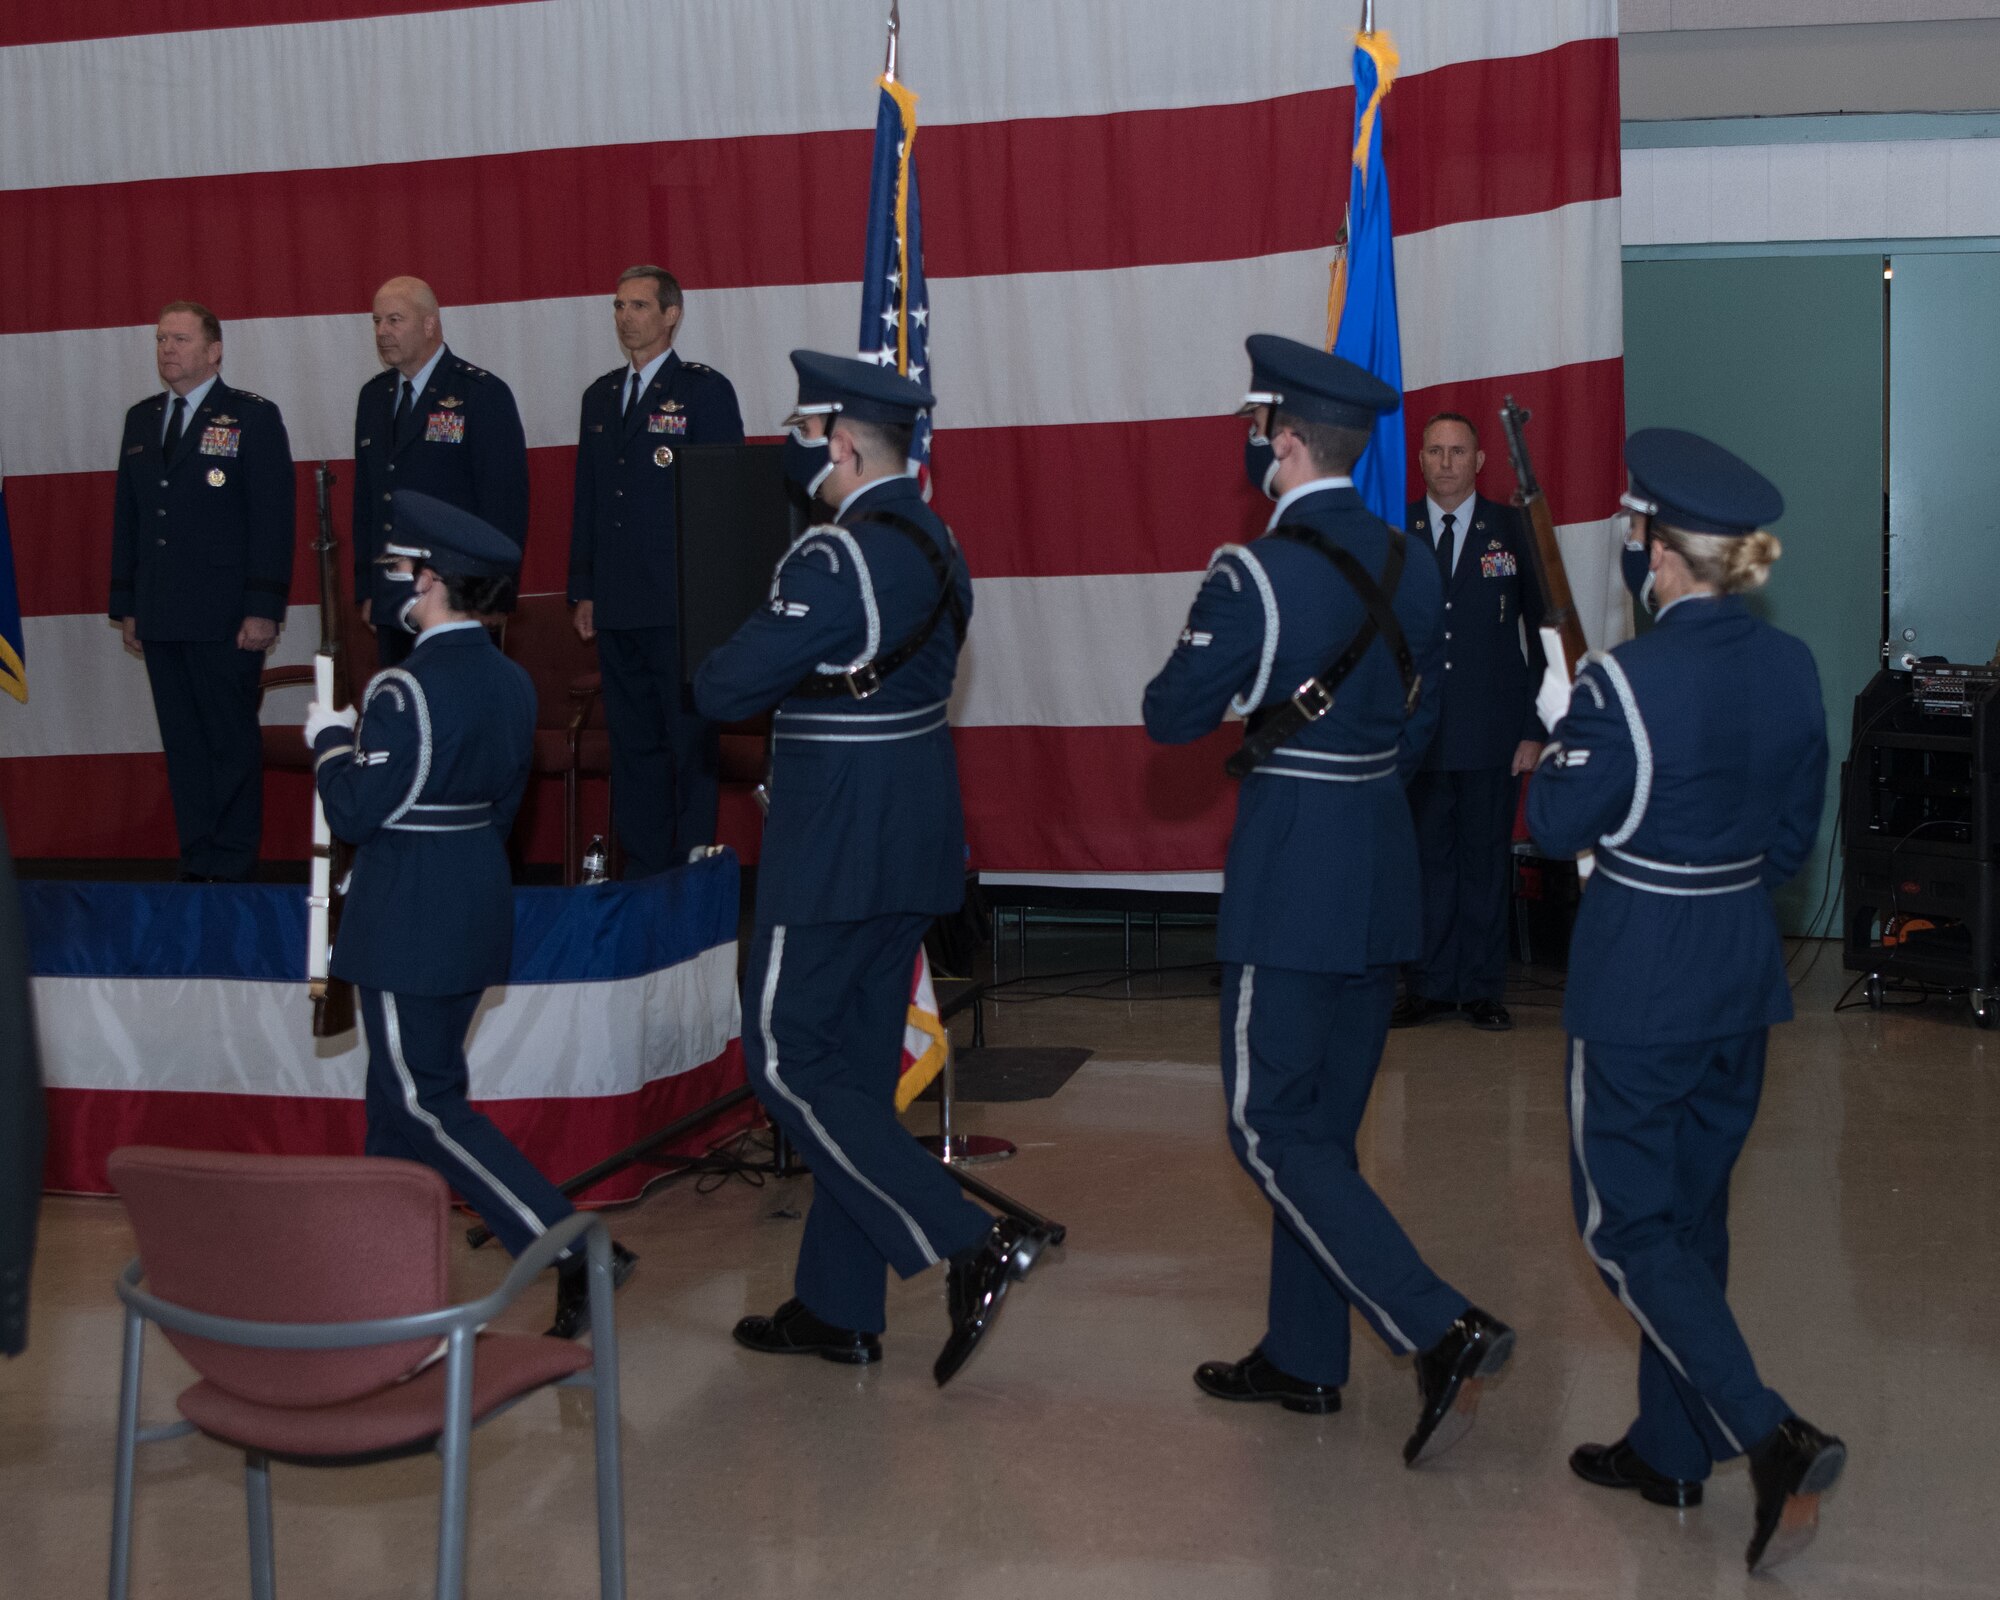 The Dyess Air Force Base Honor Guard presents the Colors at the Tenth Air Force Change of Command June 4, 2021.